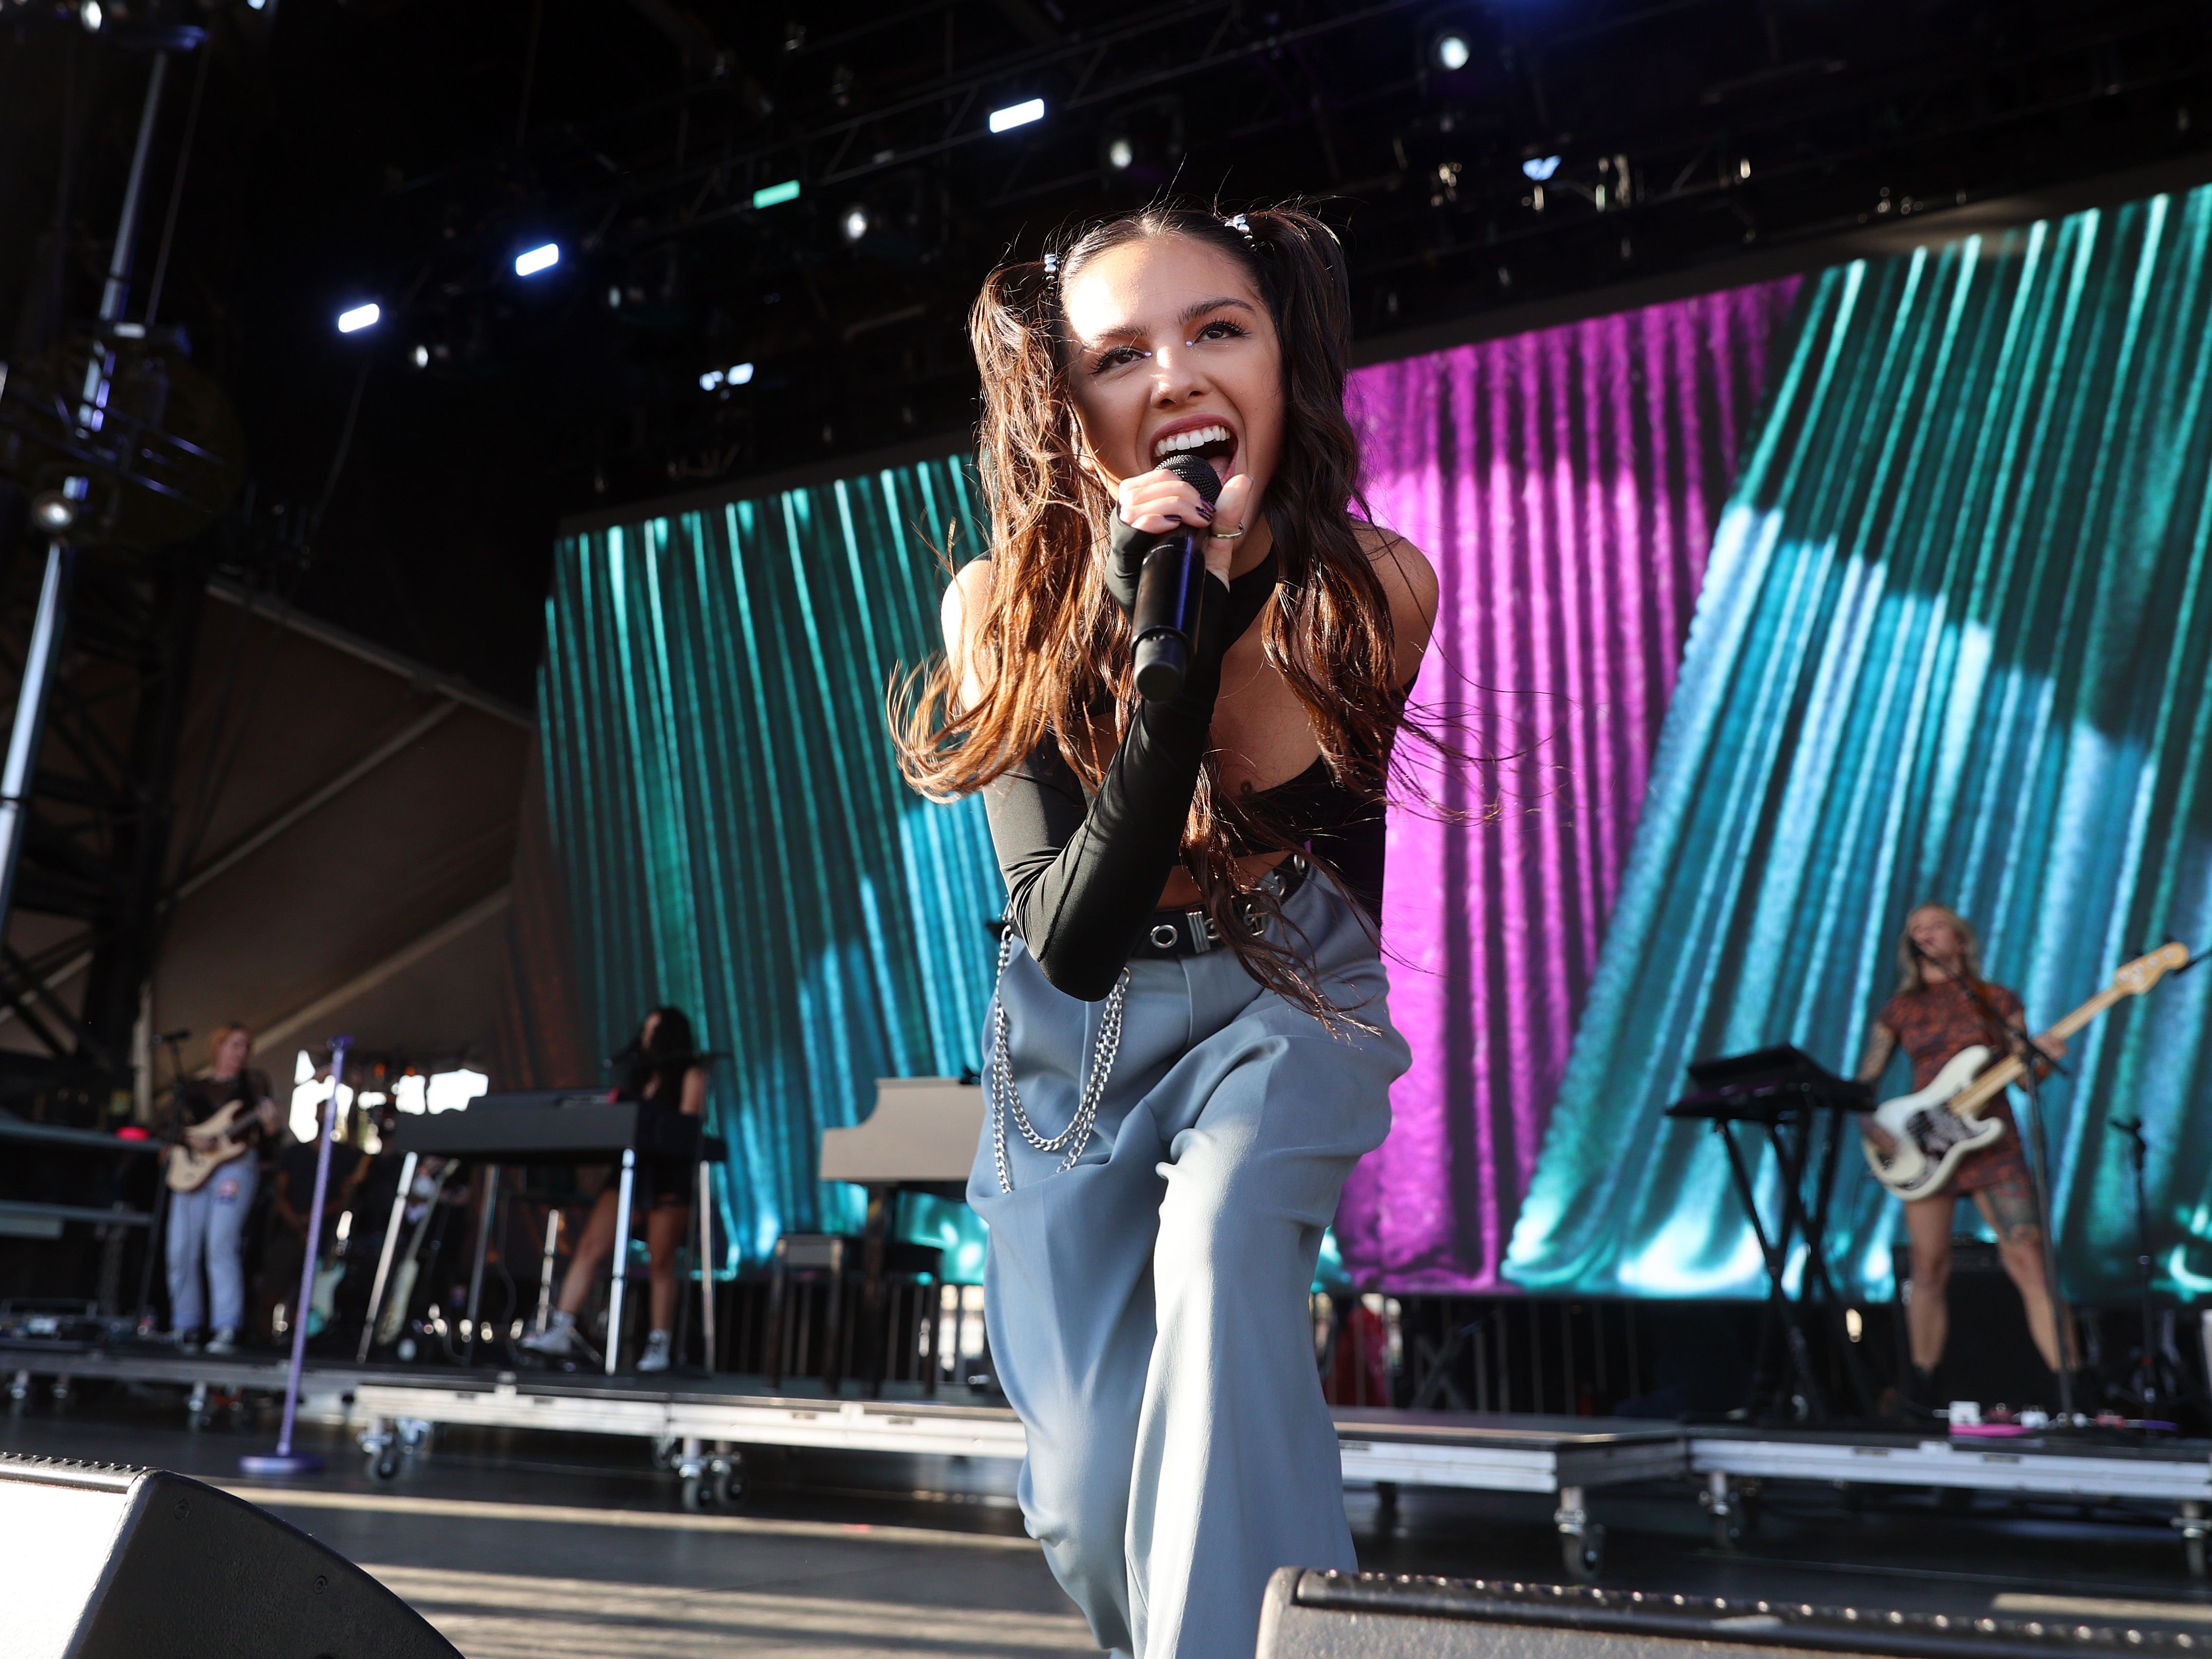 Fans Are Shocked As Olivia Rodrigo Jumps On Stage To Sing At Manchester Bar